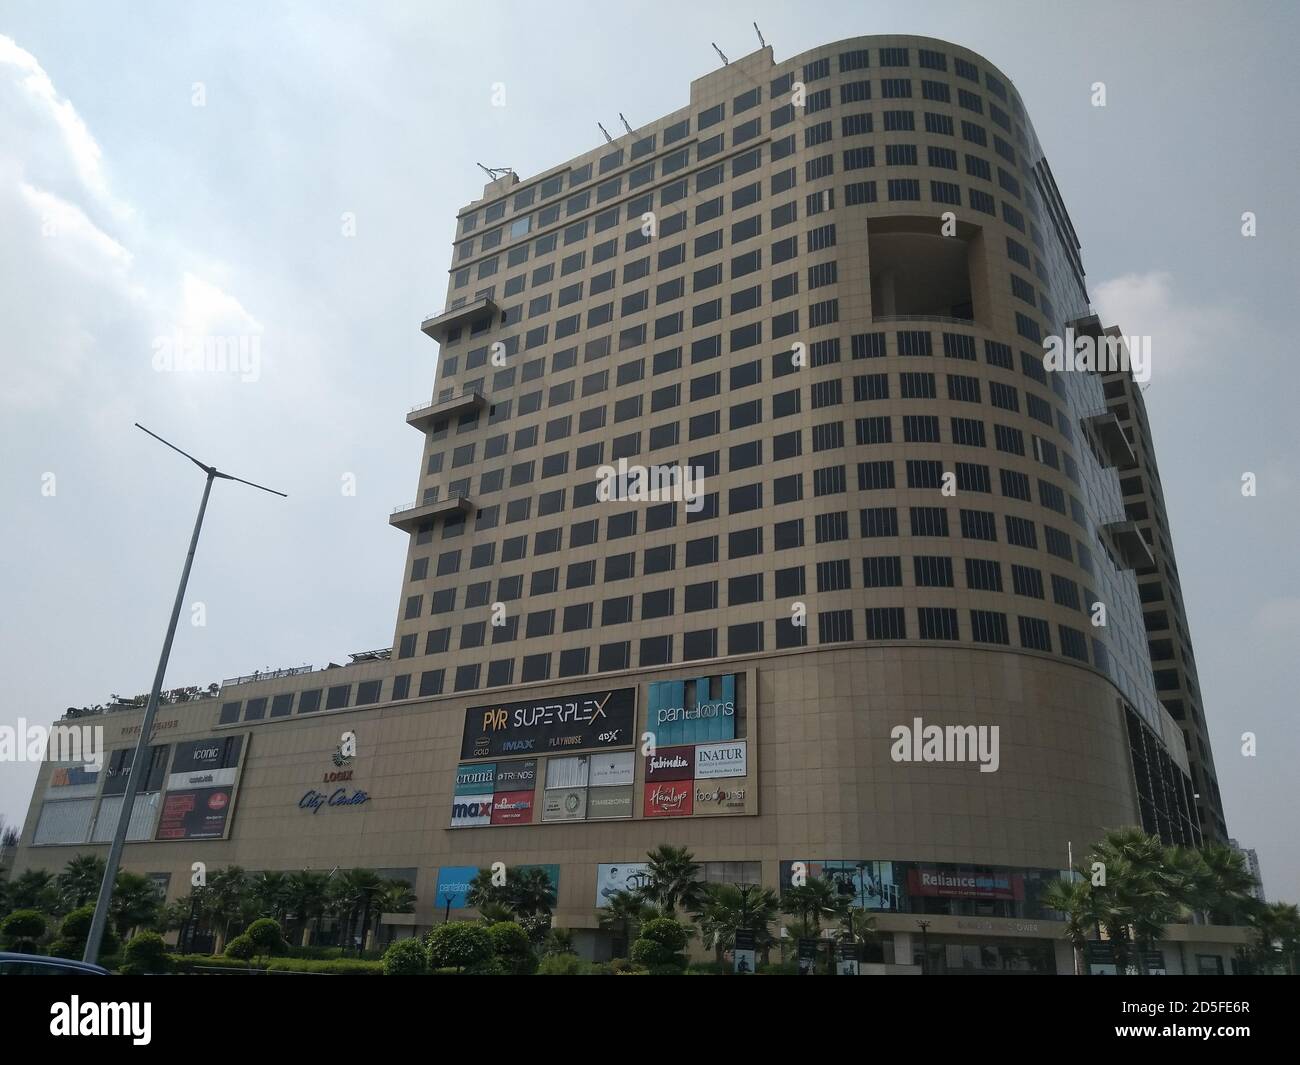 Utter pardesh , india - shopping mall , A picture of shopping mall in noida 20 september 2020 Stock Photo